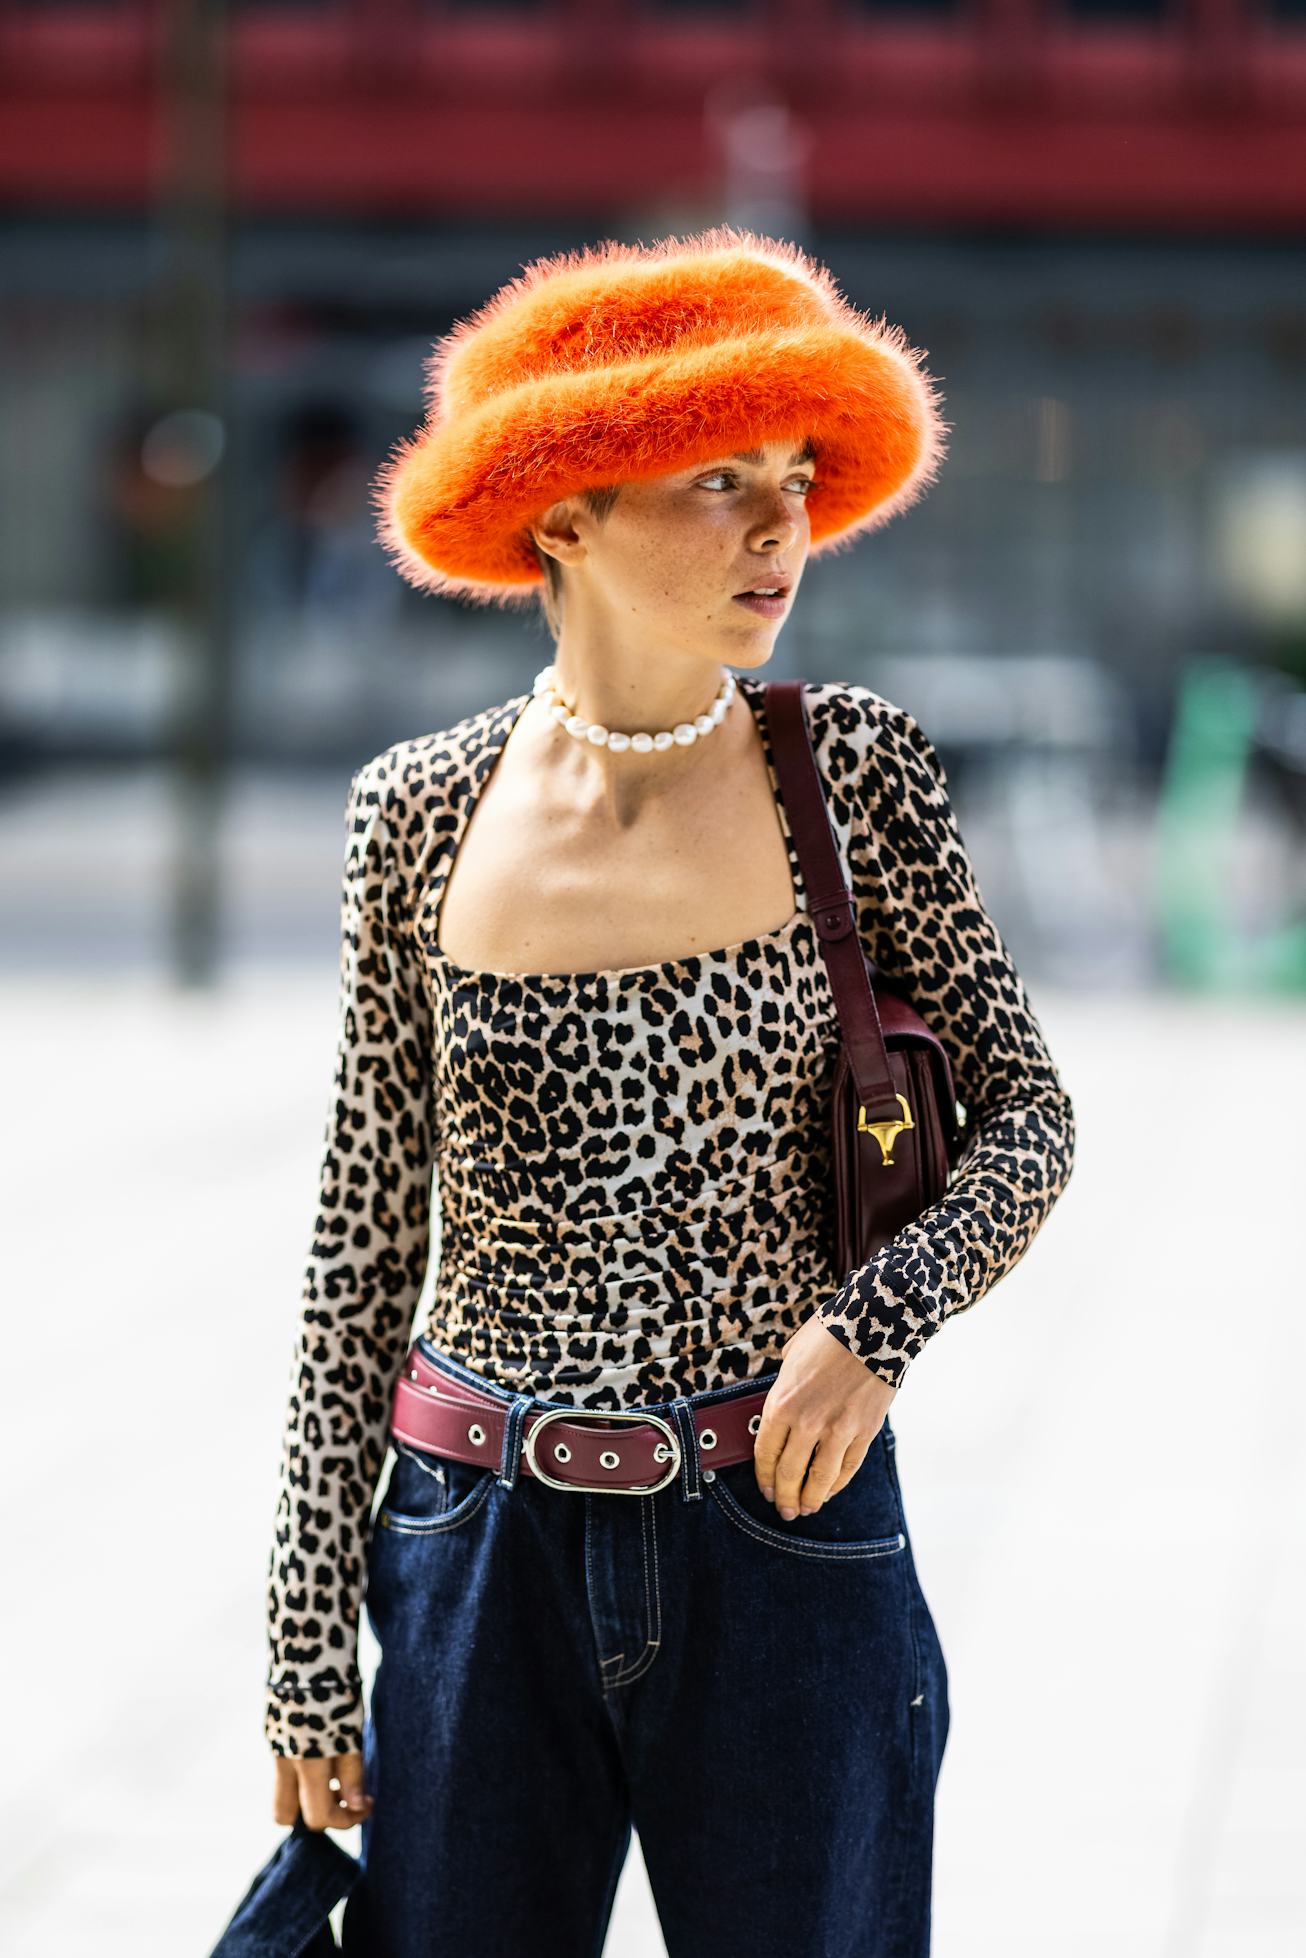 Stockholm Fashion Week's Street Style Is Full Of Summer-To-Fall Outfit ...